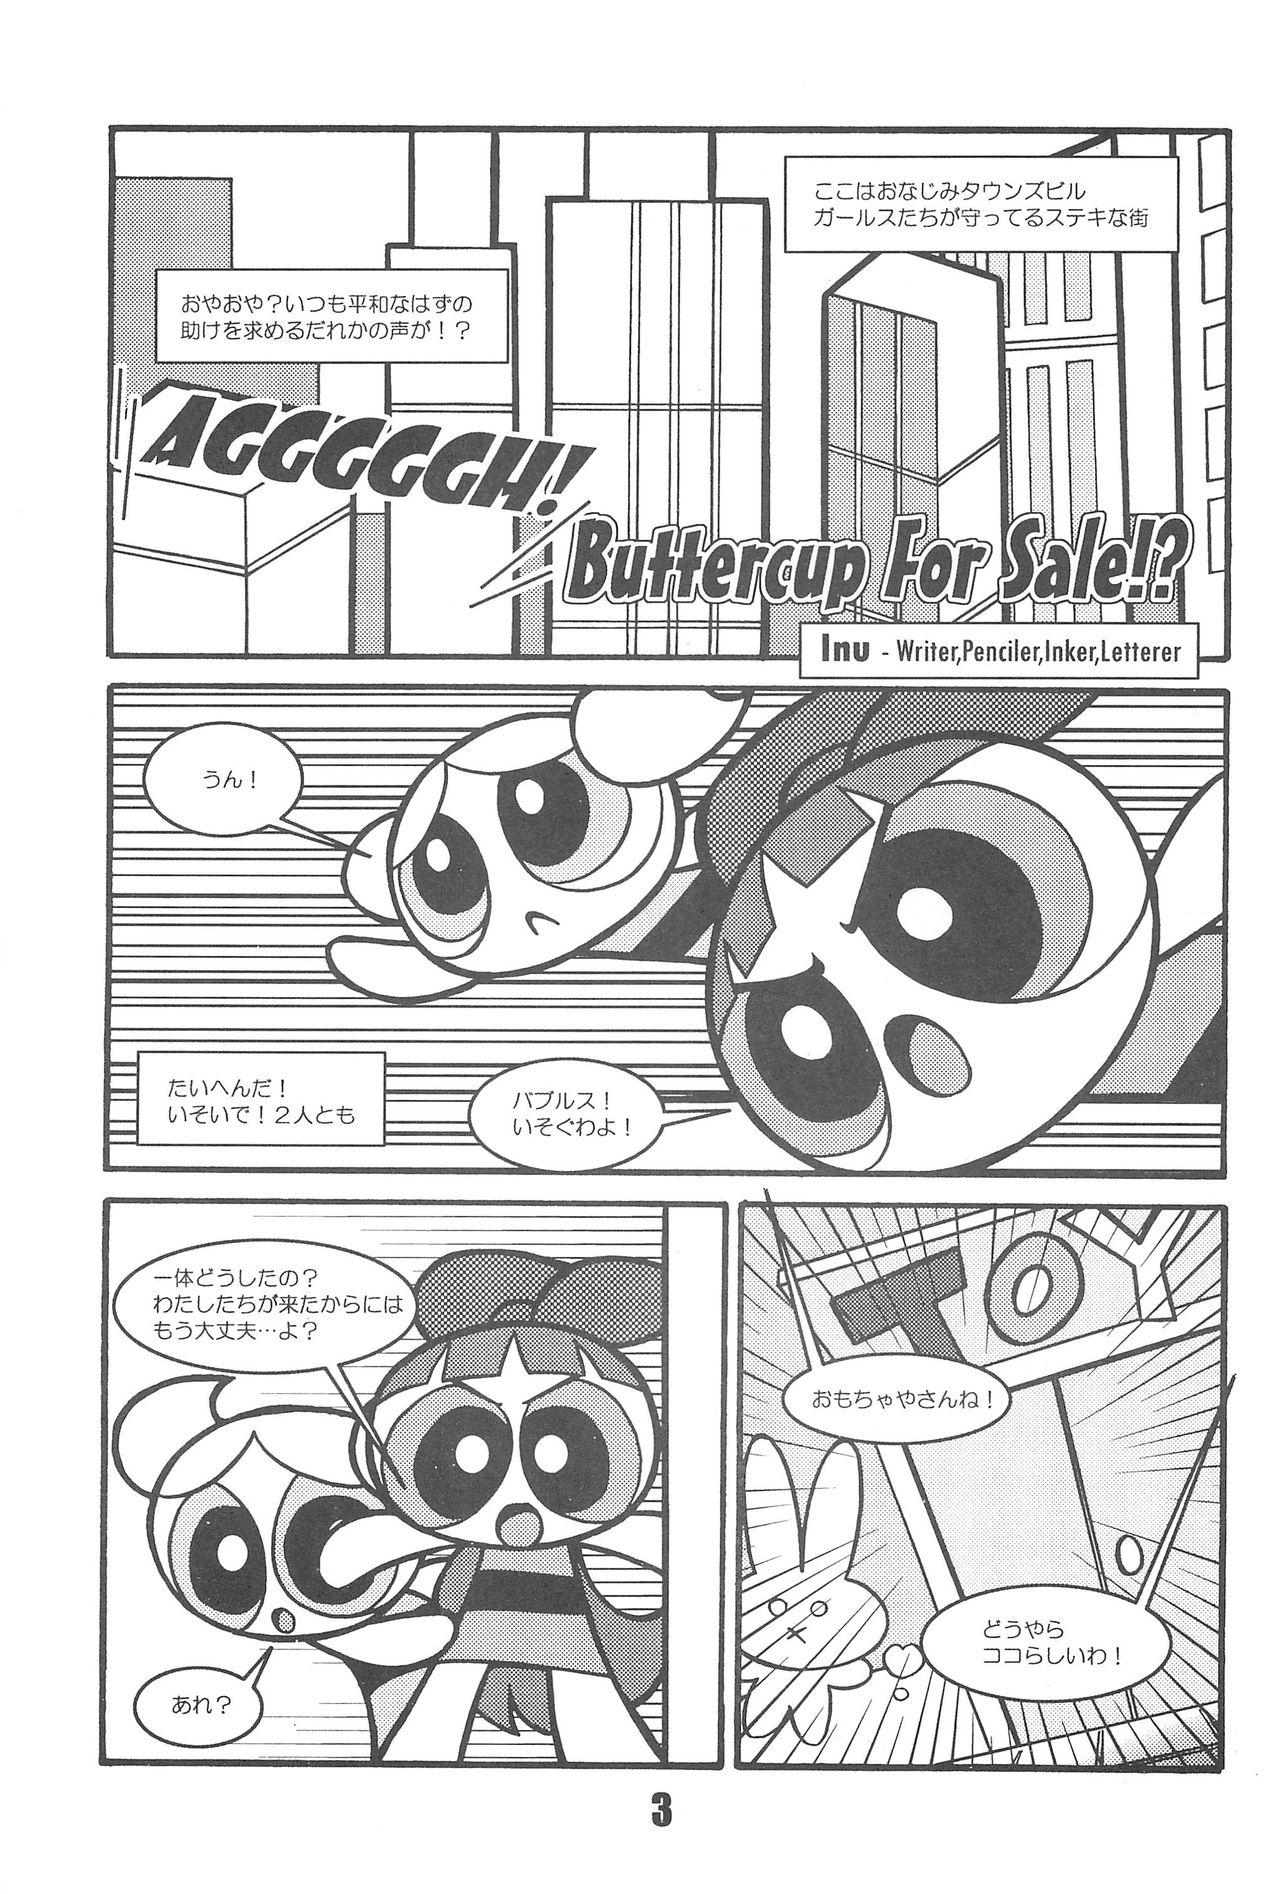 Toy Show Goes On! Funhouse 22th - The powerpuff girls Fishnets - Page 3